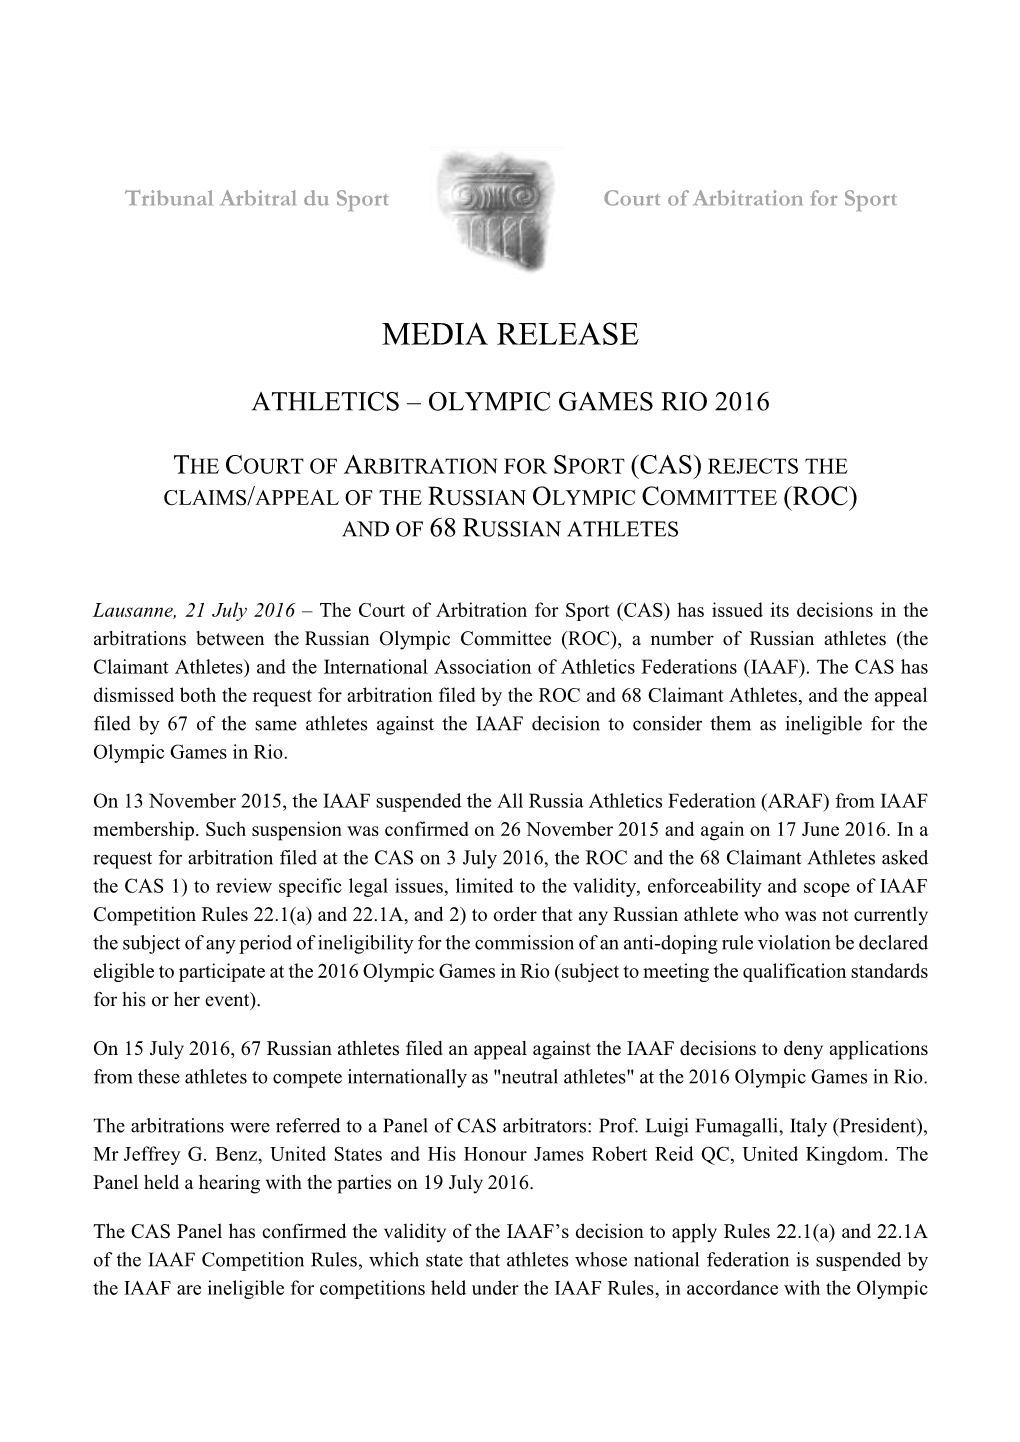 (Cas) Rejects the Claims/Appeal of the Russian Olympic Committee (Roc) and of 68 Russian Athletes